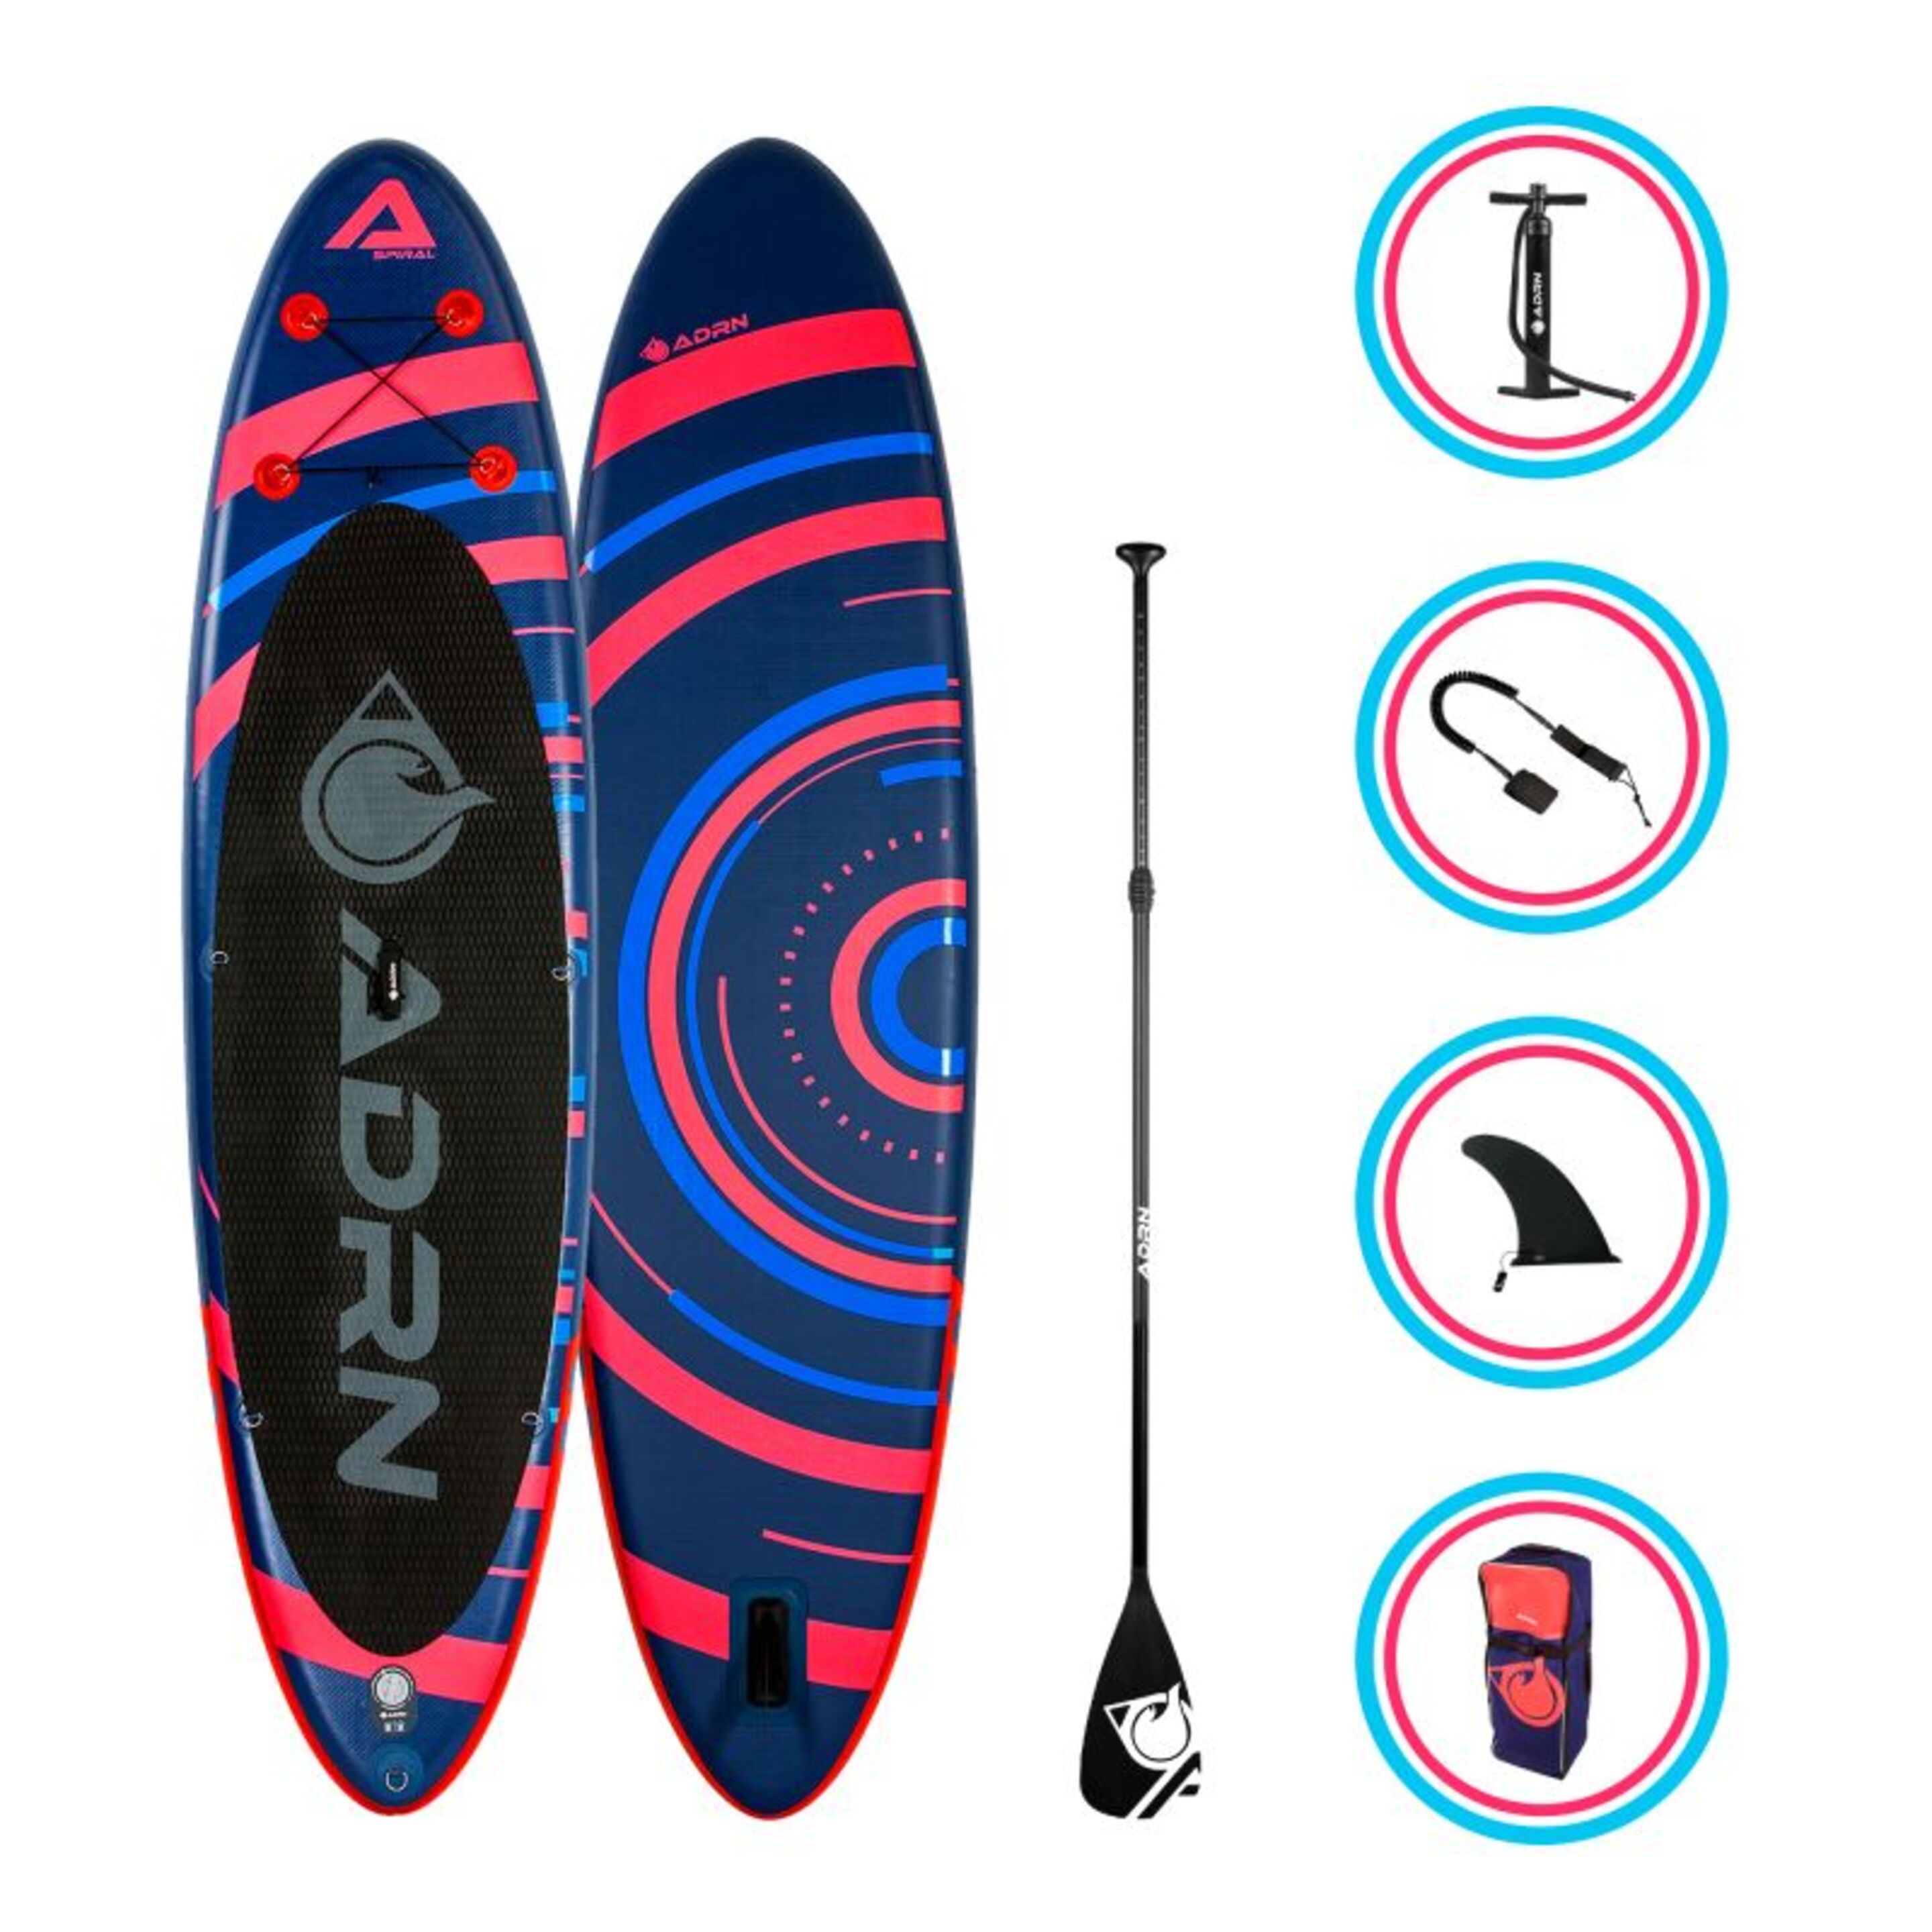 Paddle Hinchable Spiral 10'8 + Accesorios 325 X 81 X 15 Cm